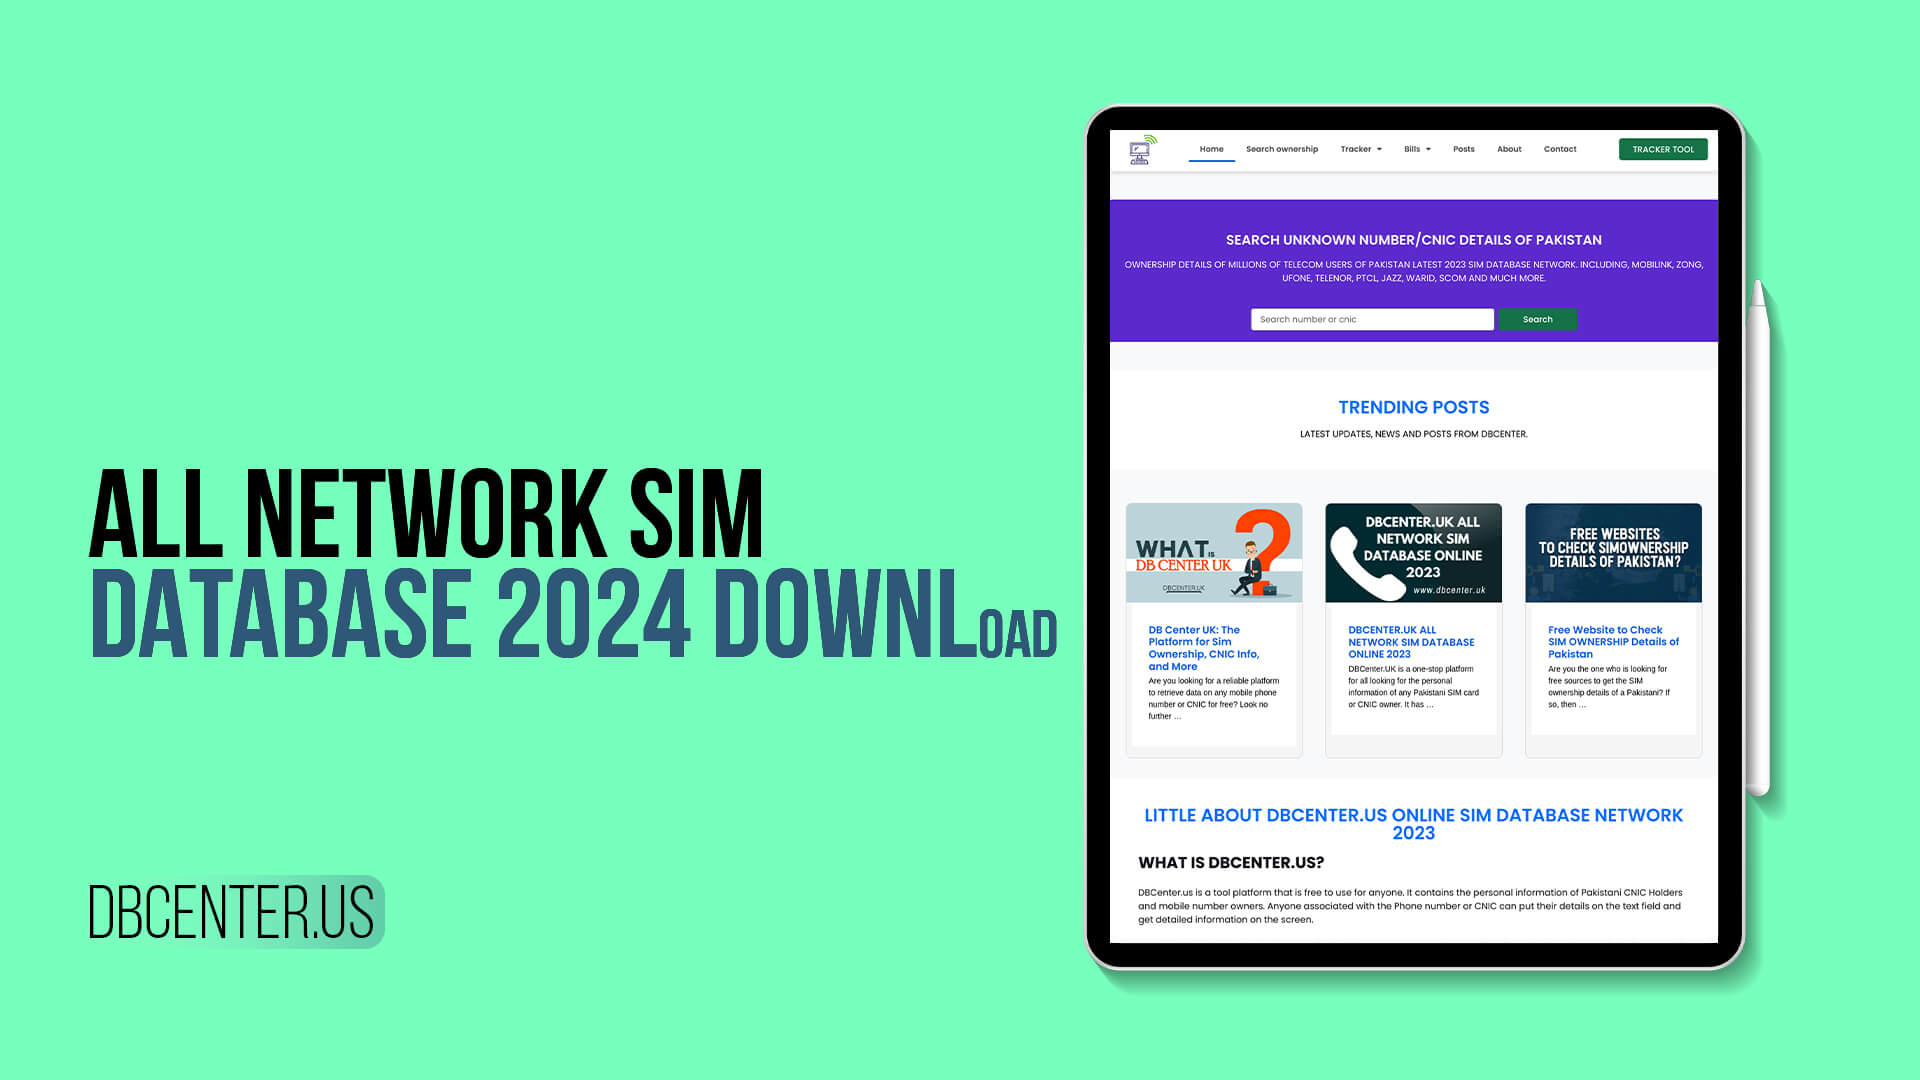 All Network SIM Database 2024 Download